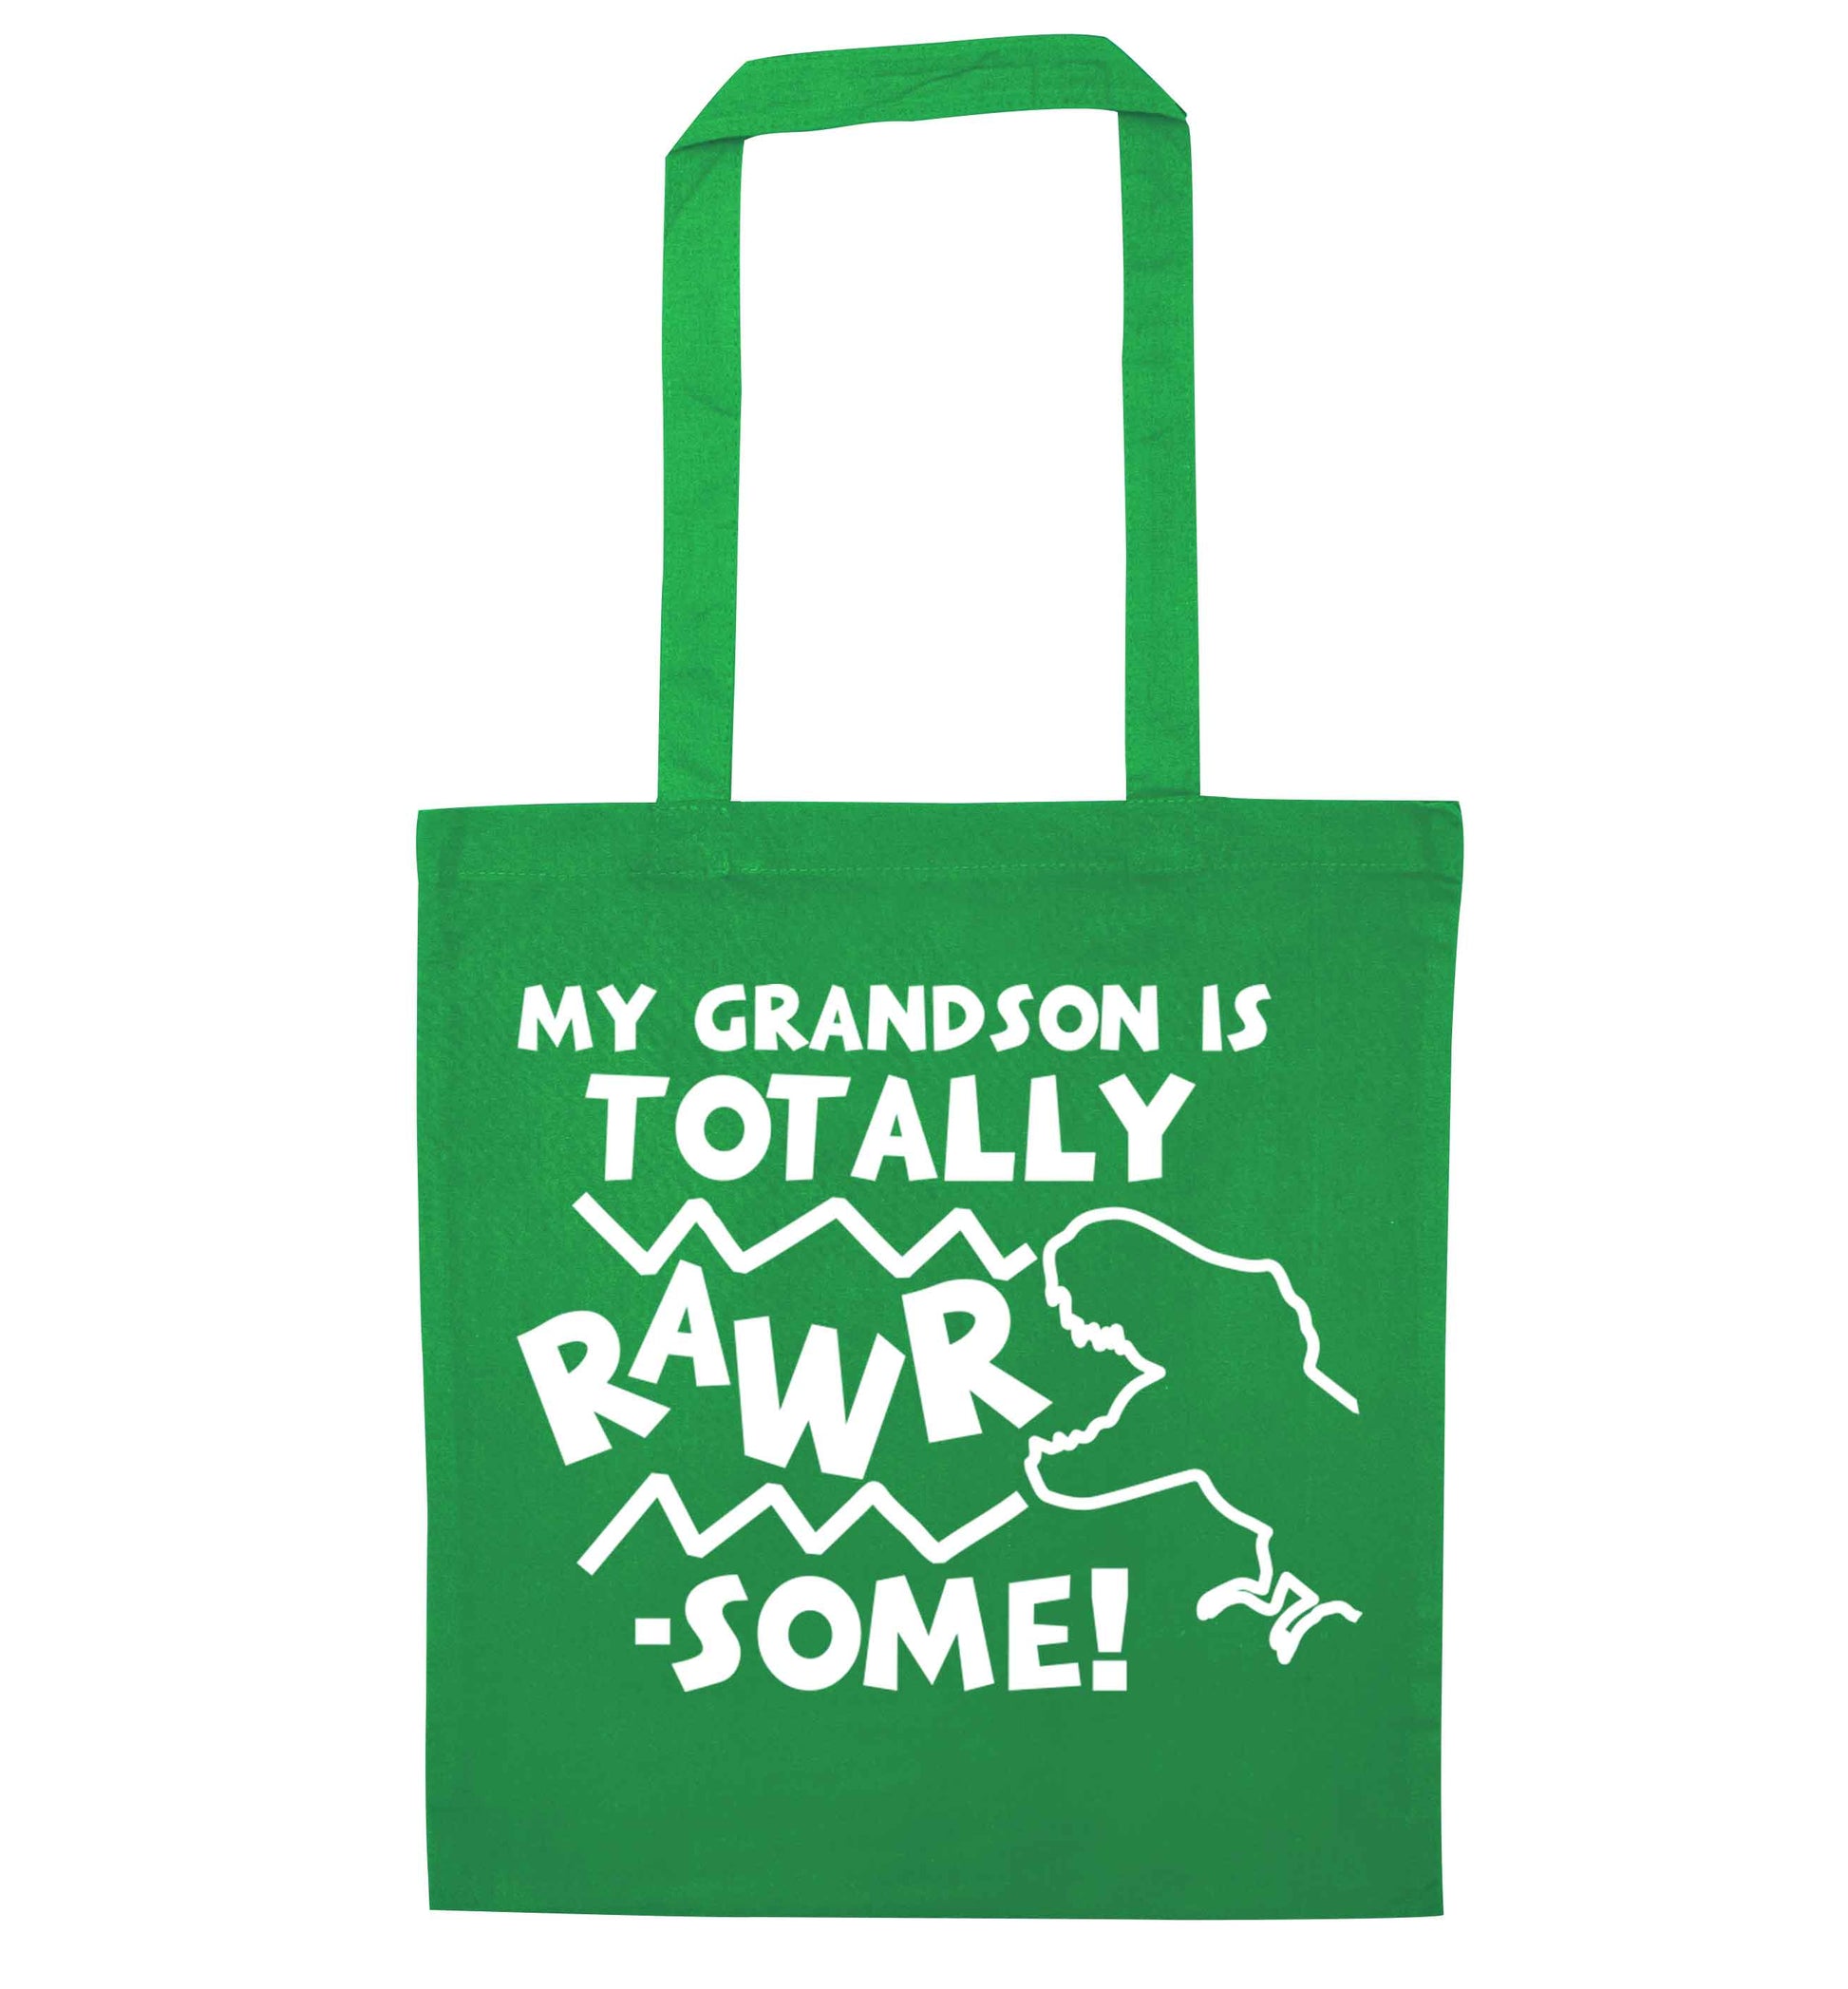 My grandson is totally rawrsome green tote bag